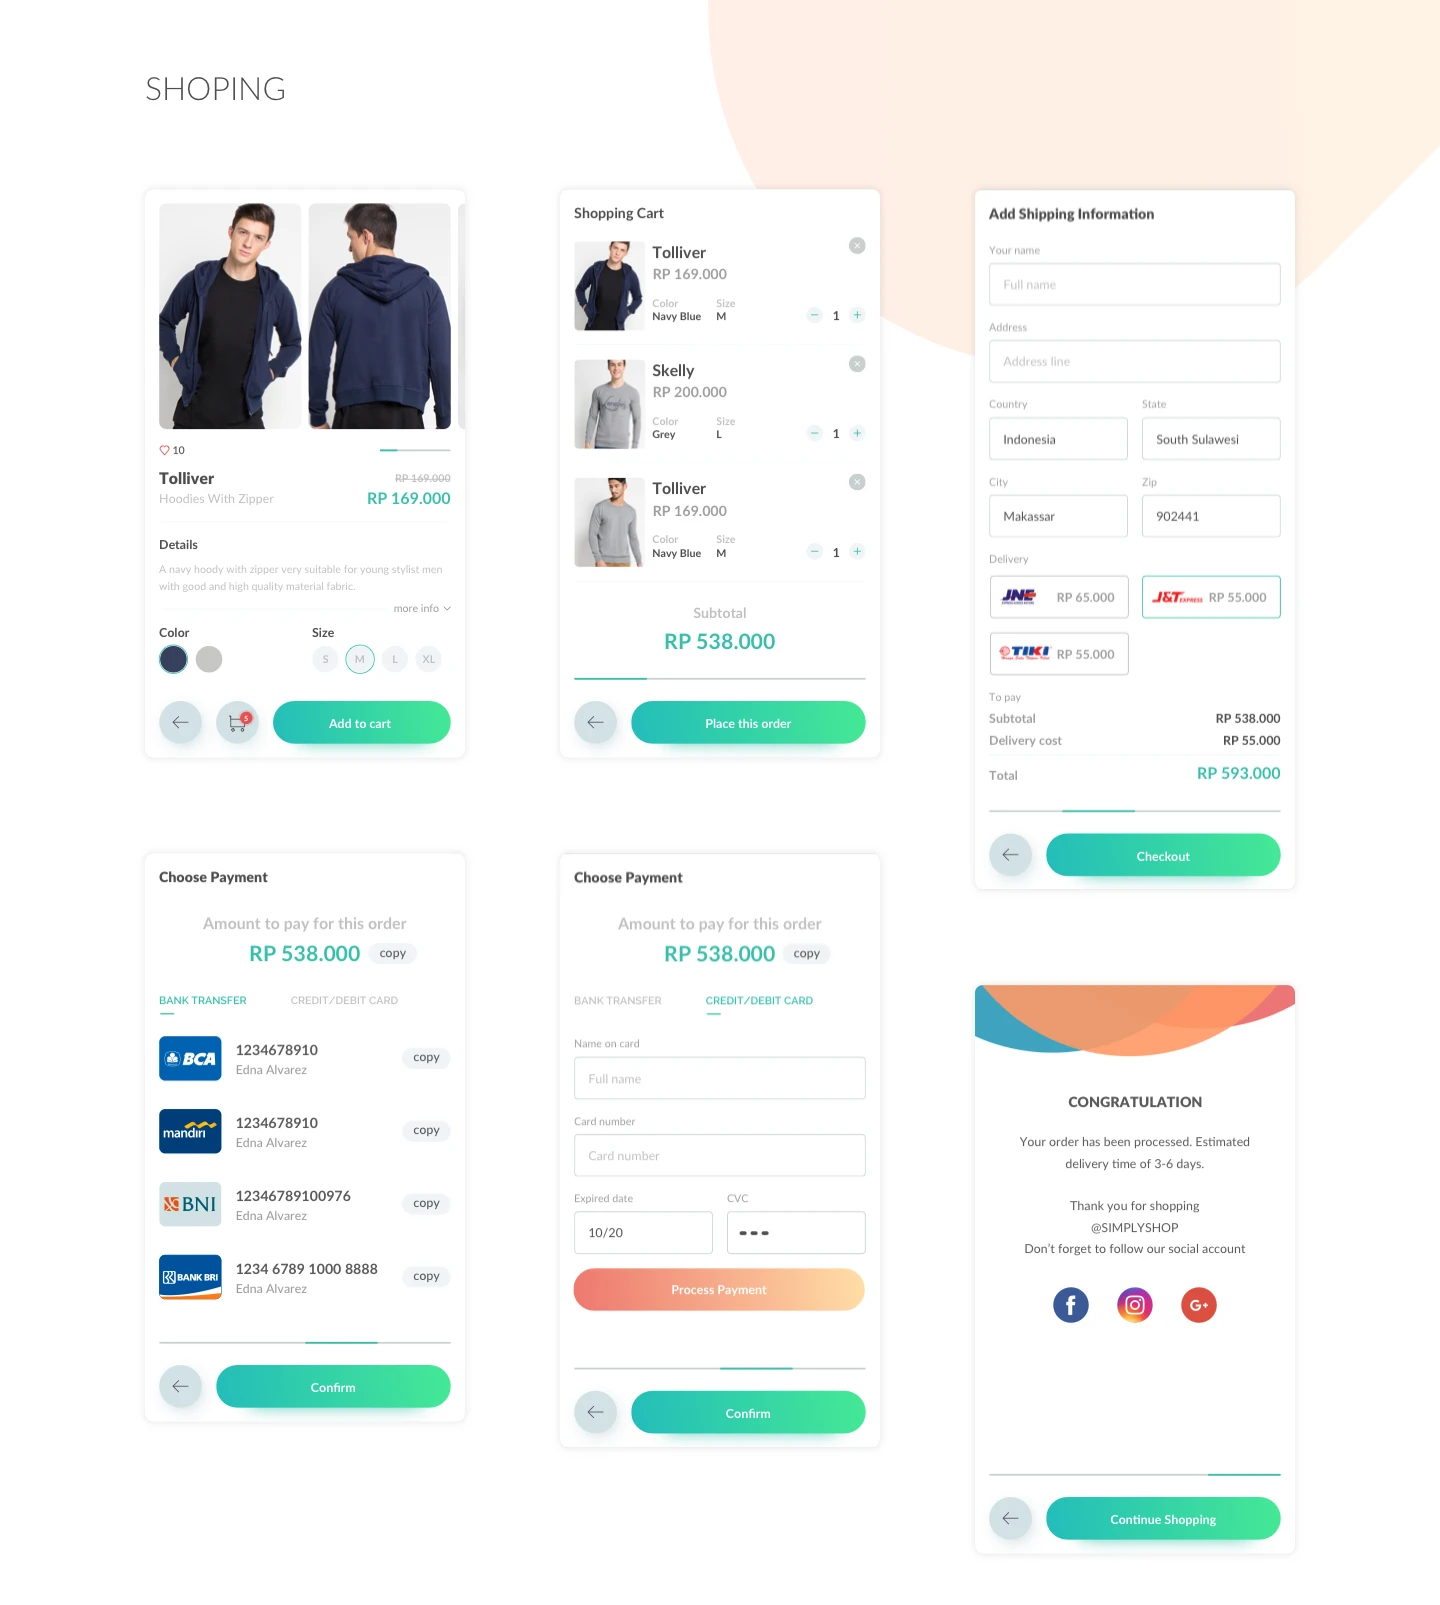 Simply eCommerce UI Kit - Simply is an e-commerce UI Kit. Was crafted especially for small or medium business who want to have e-commerce app.